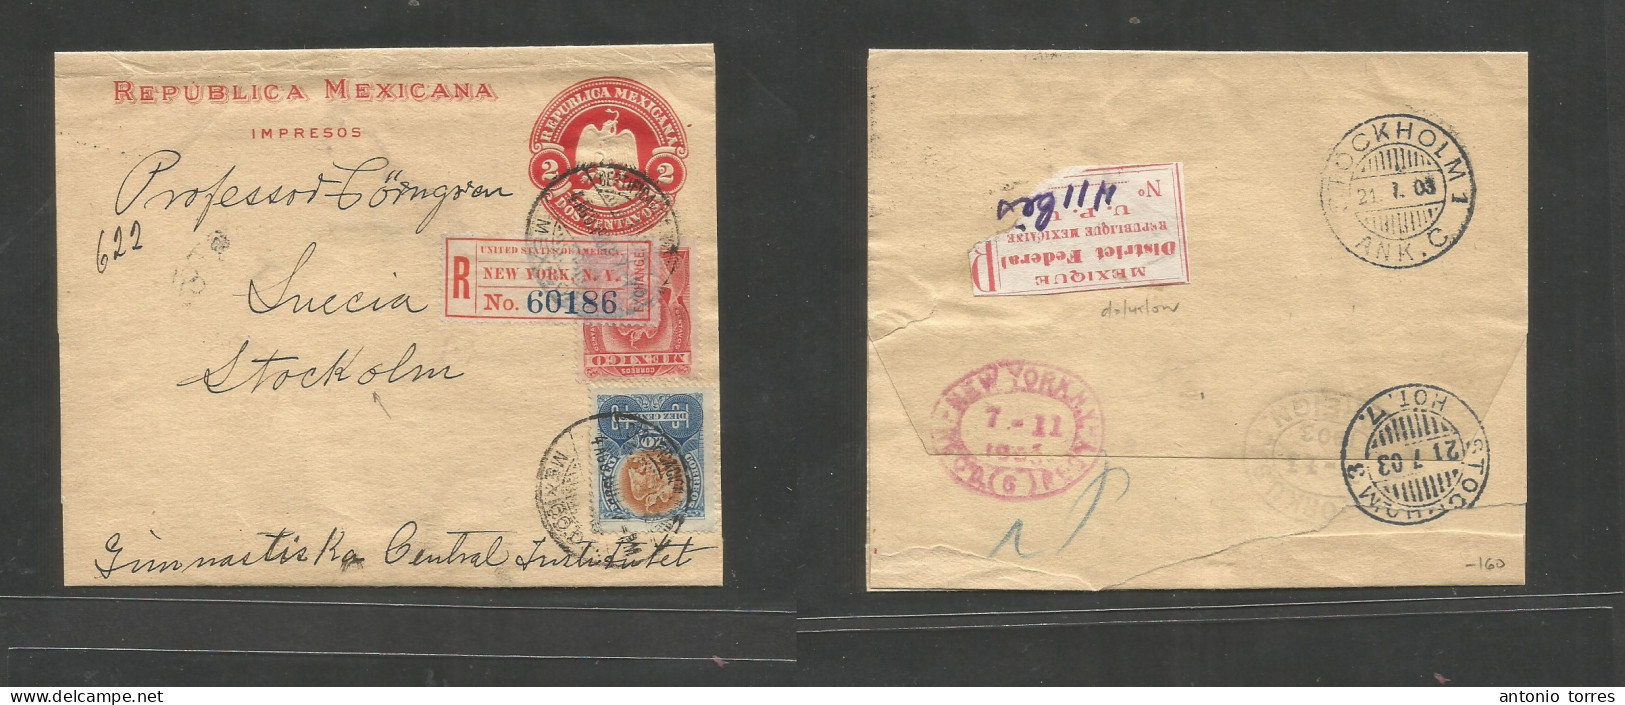 Mexico - Stationery. 1903 (4 Aug) DF - Sweden, Stockholm (21 July 03) Via NYC. Registered 2c Red Complete Stat Wrapper + - Mexique